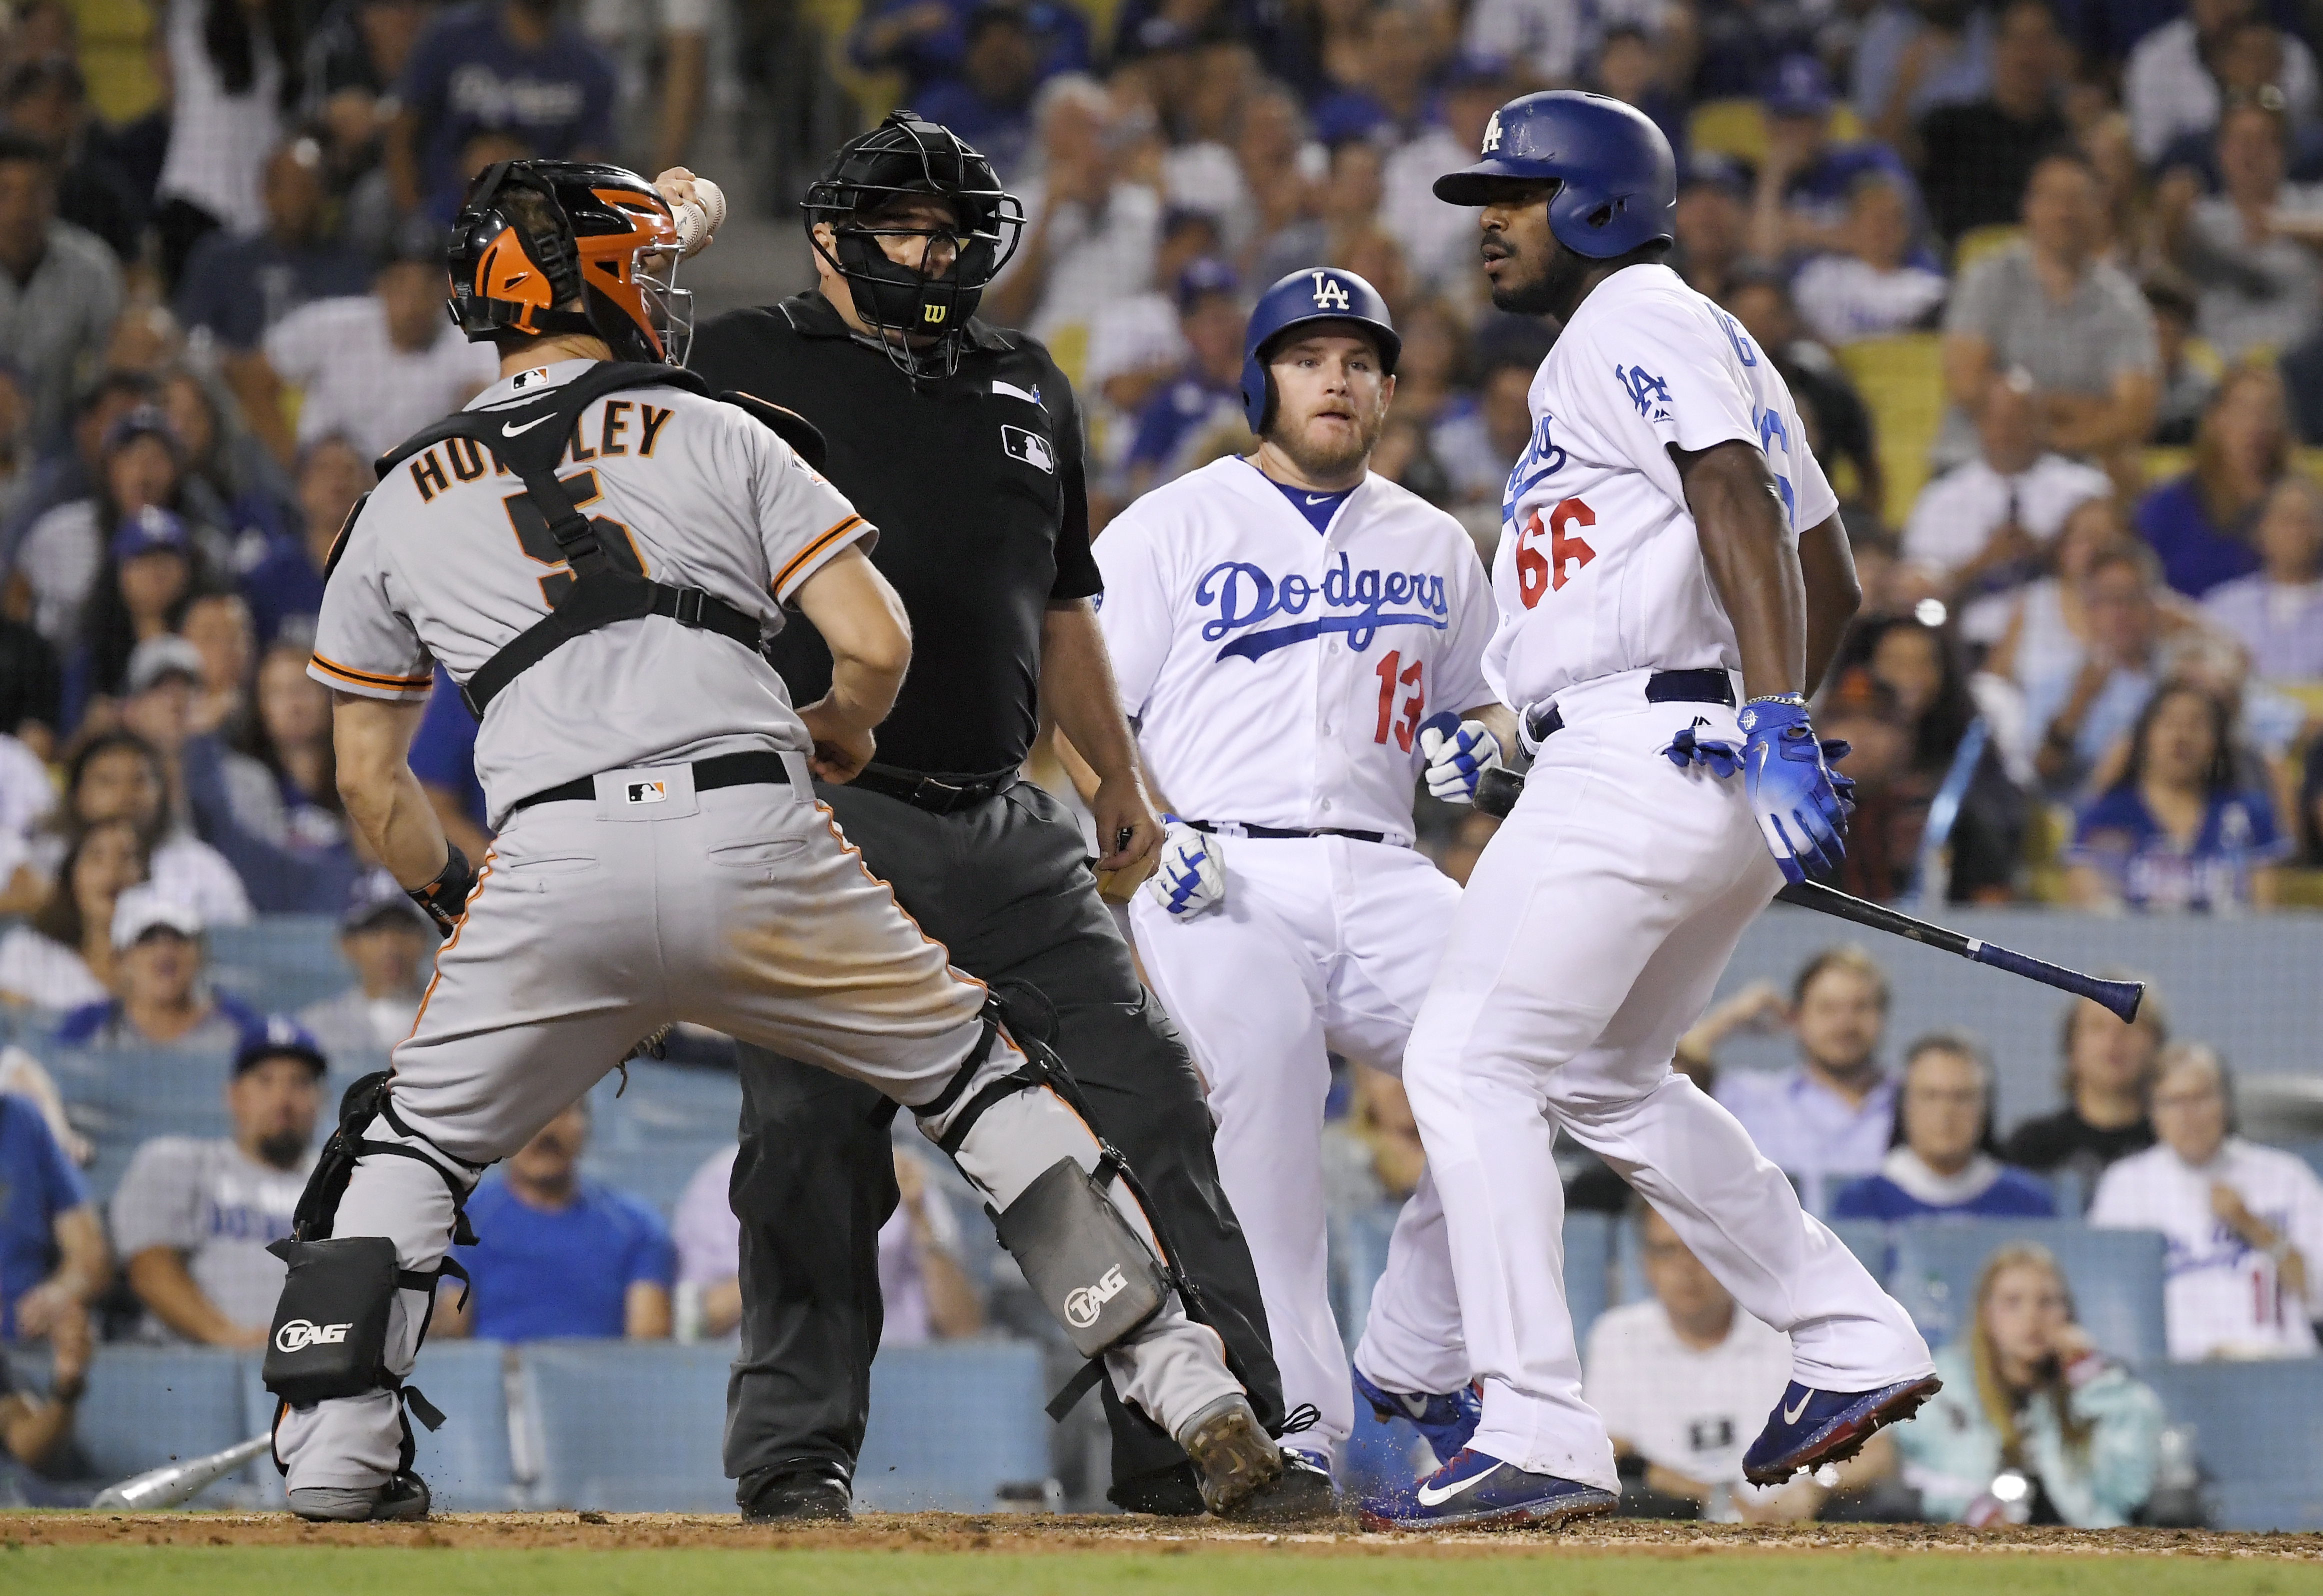 Puig takes swing at Hundley, both ejected as benches clear